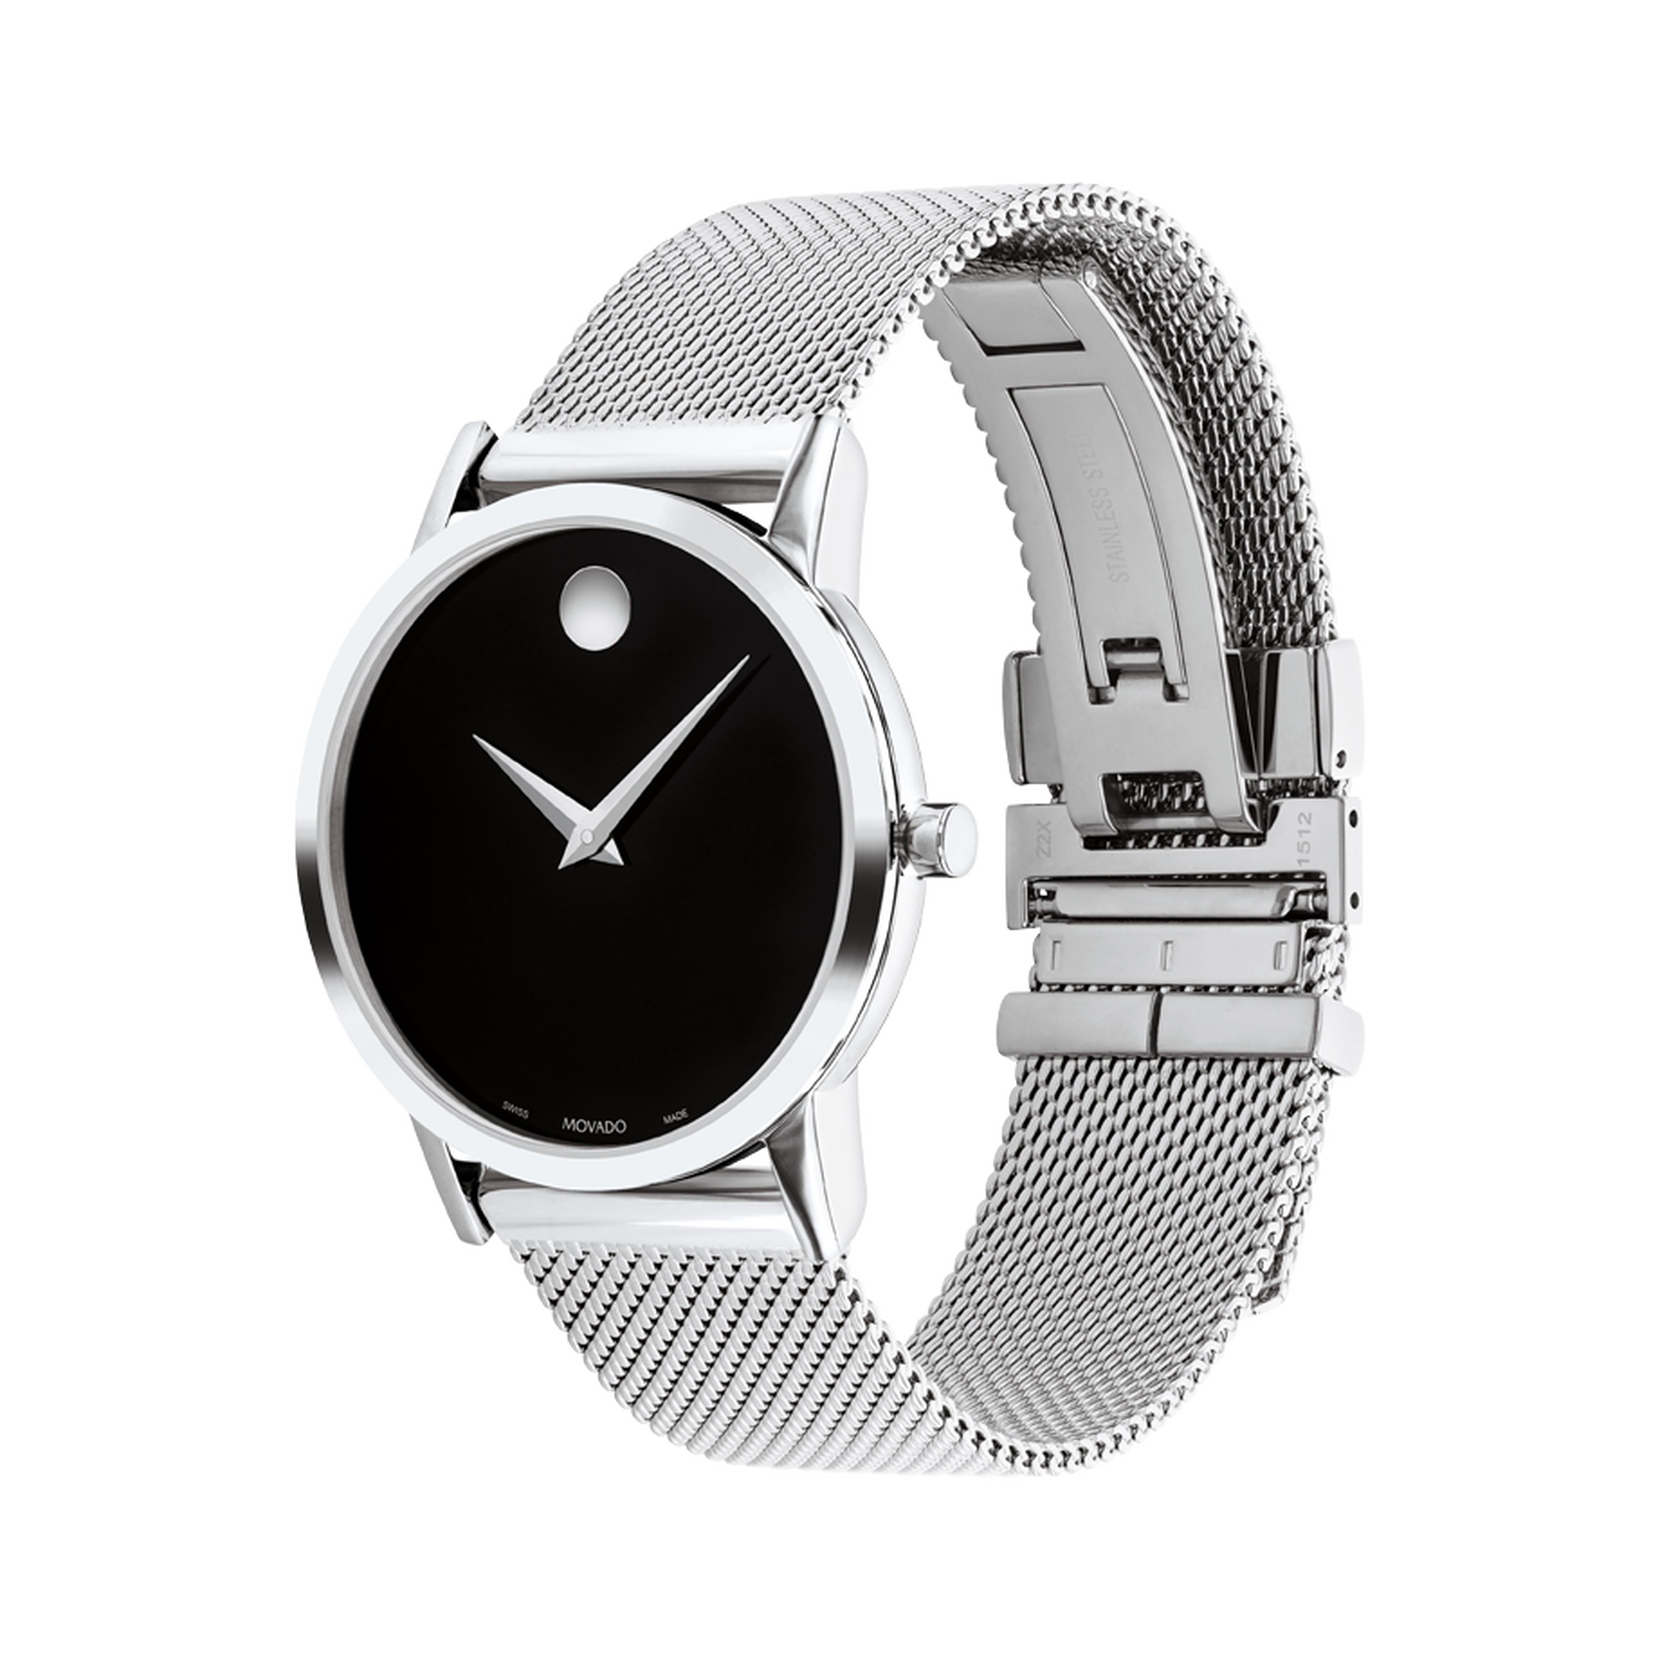 MOVADO Men's Extra Large Museum Style Watch SS w/ Black Dial - $1.5K A